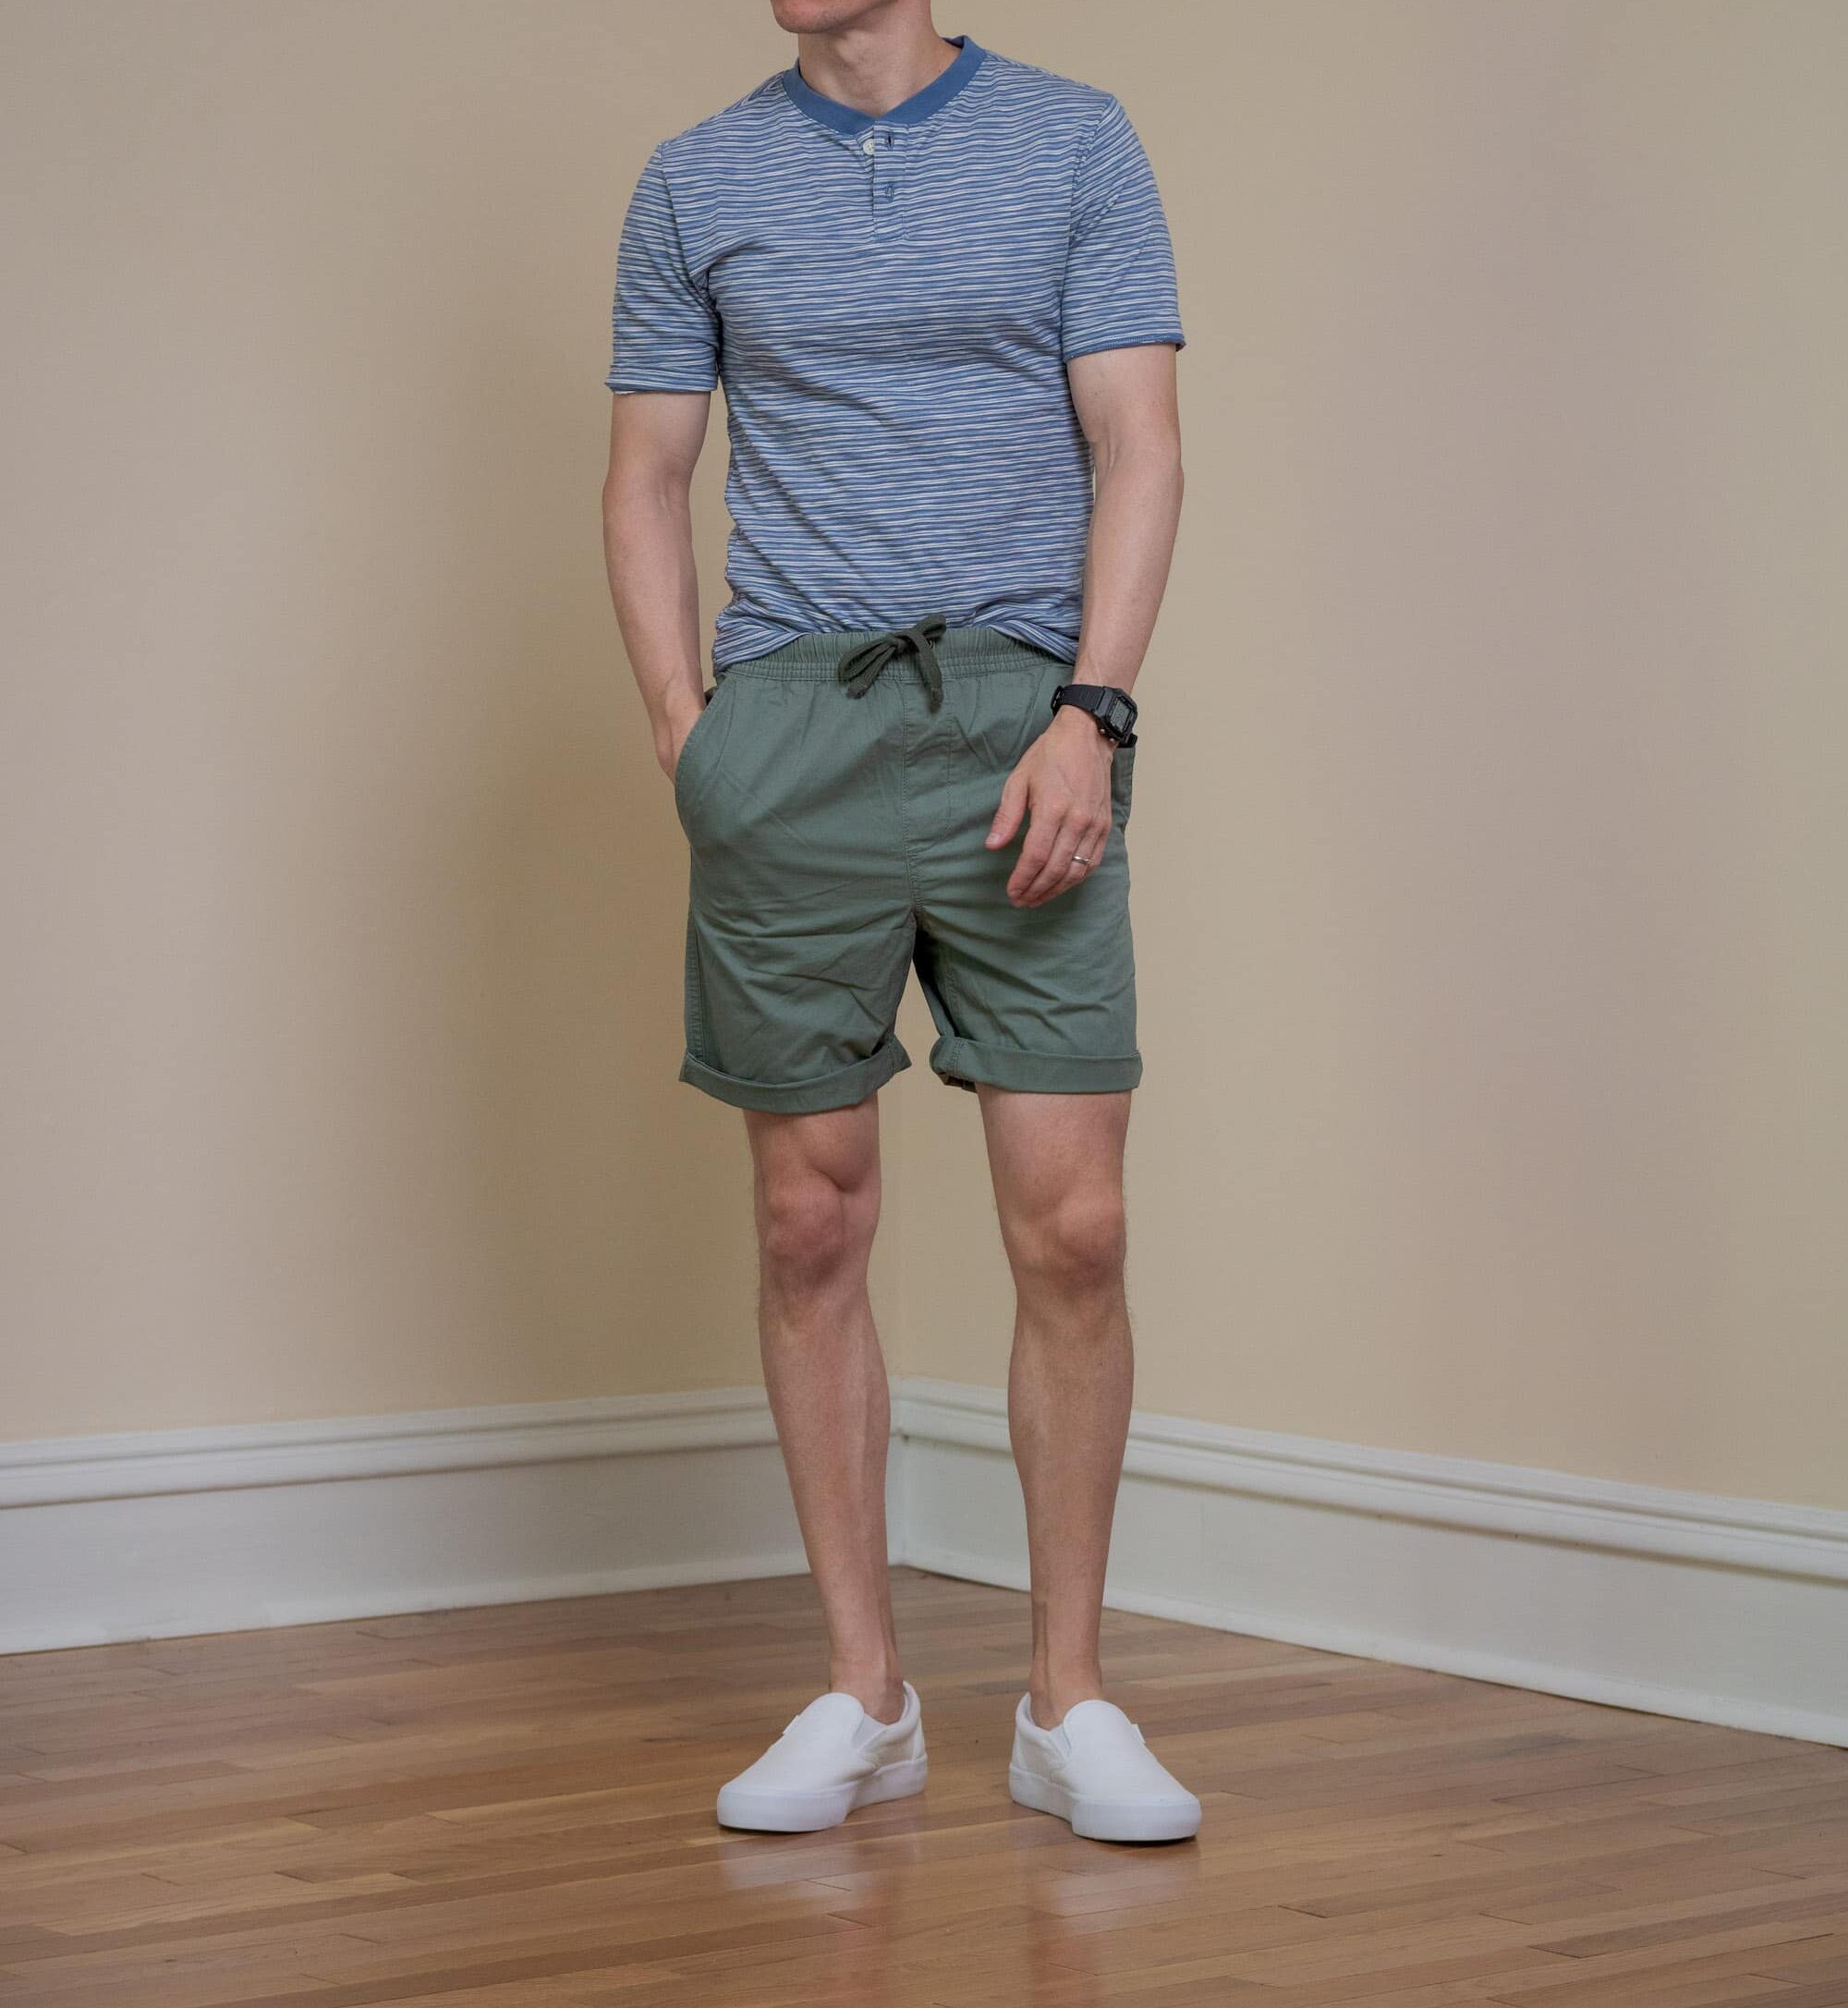 White Denim Shorts with Black Shoes Outfits For Men (8 ideas & outfits)